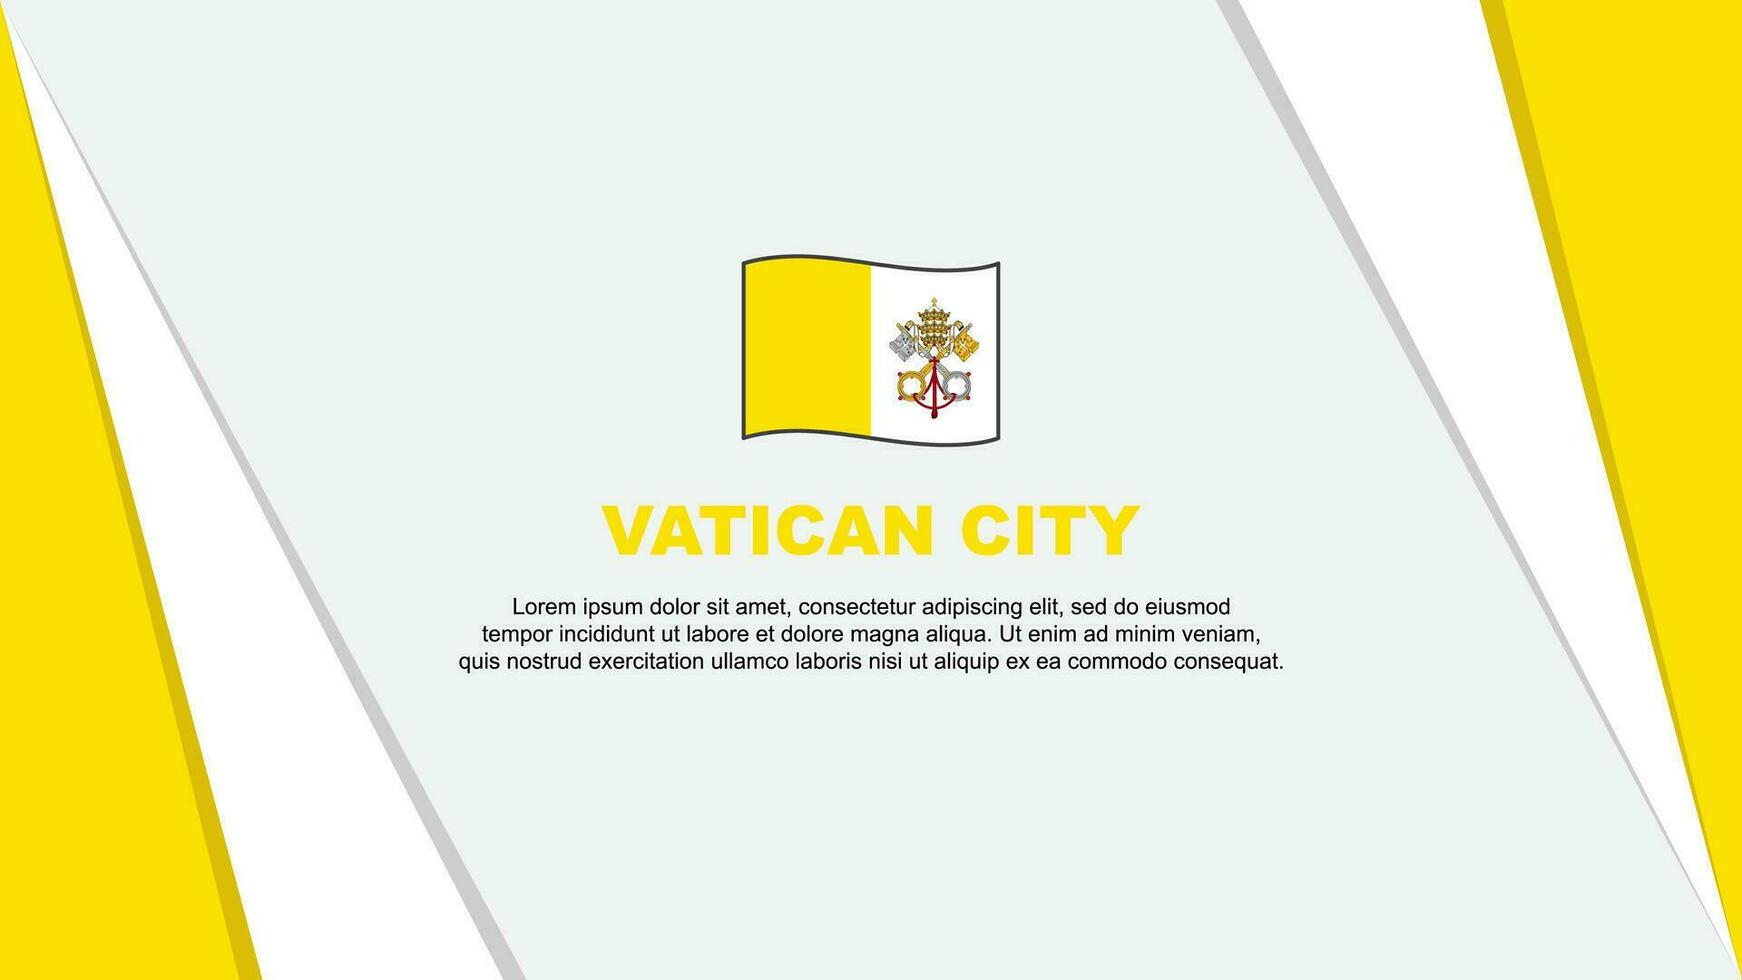 Vatican City Flag Abstract Background Design Template. Vatican City Independence Day Banner Cartoon Vector Illustration. Vatican City Banner